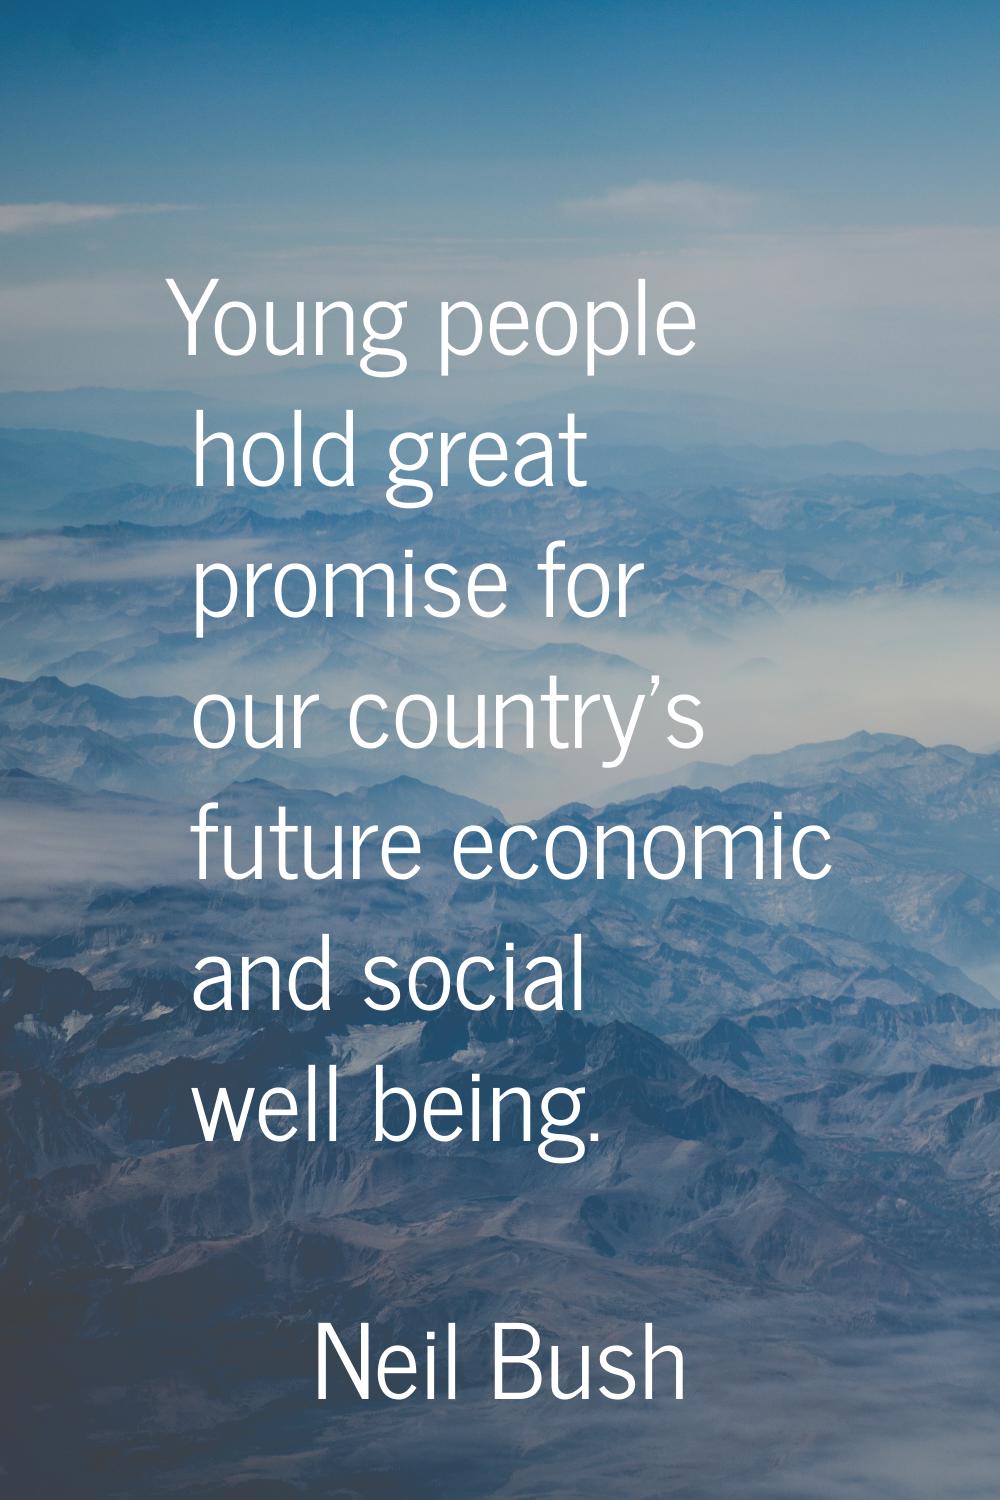 Young people hold great promise for our country's future economic and social well being.